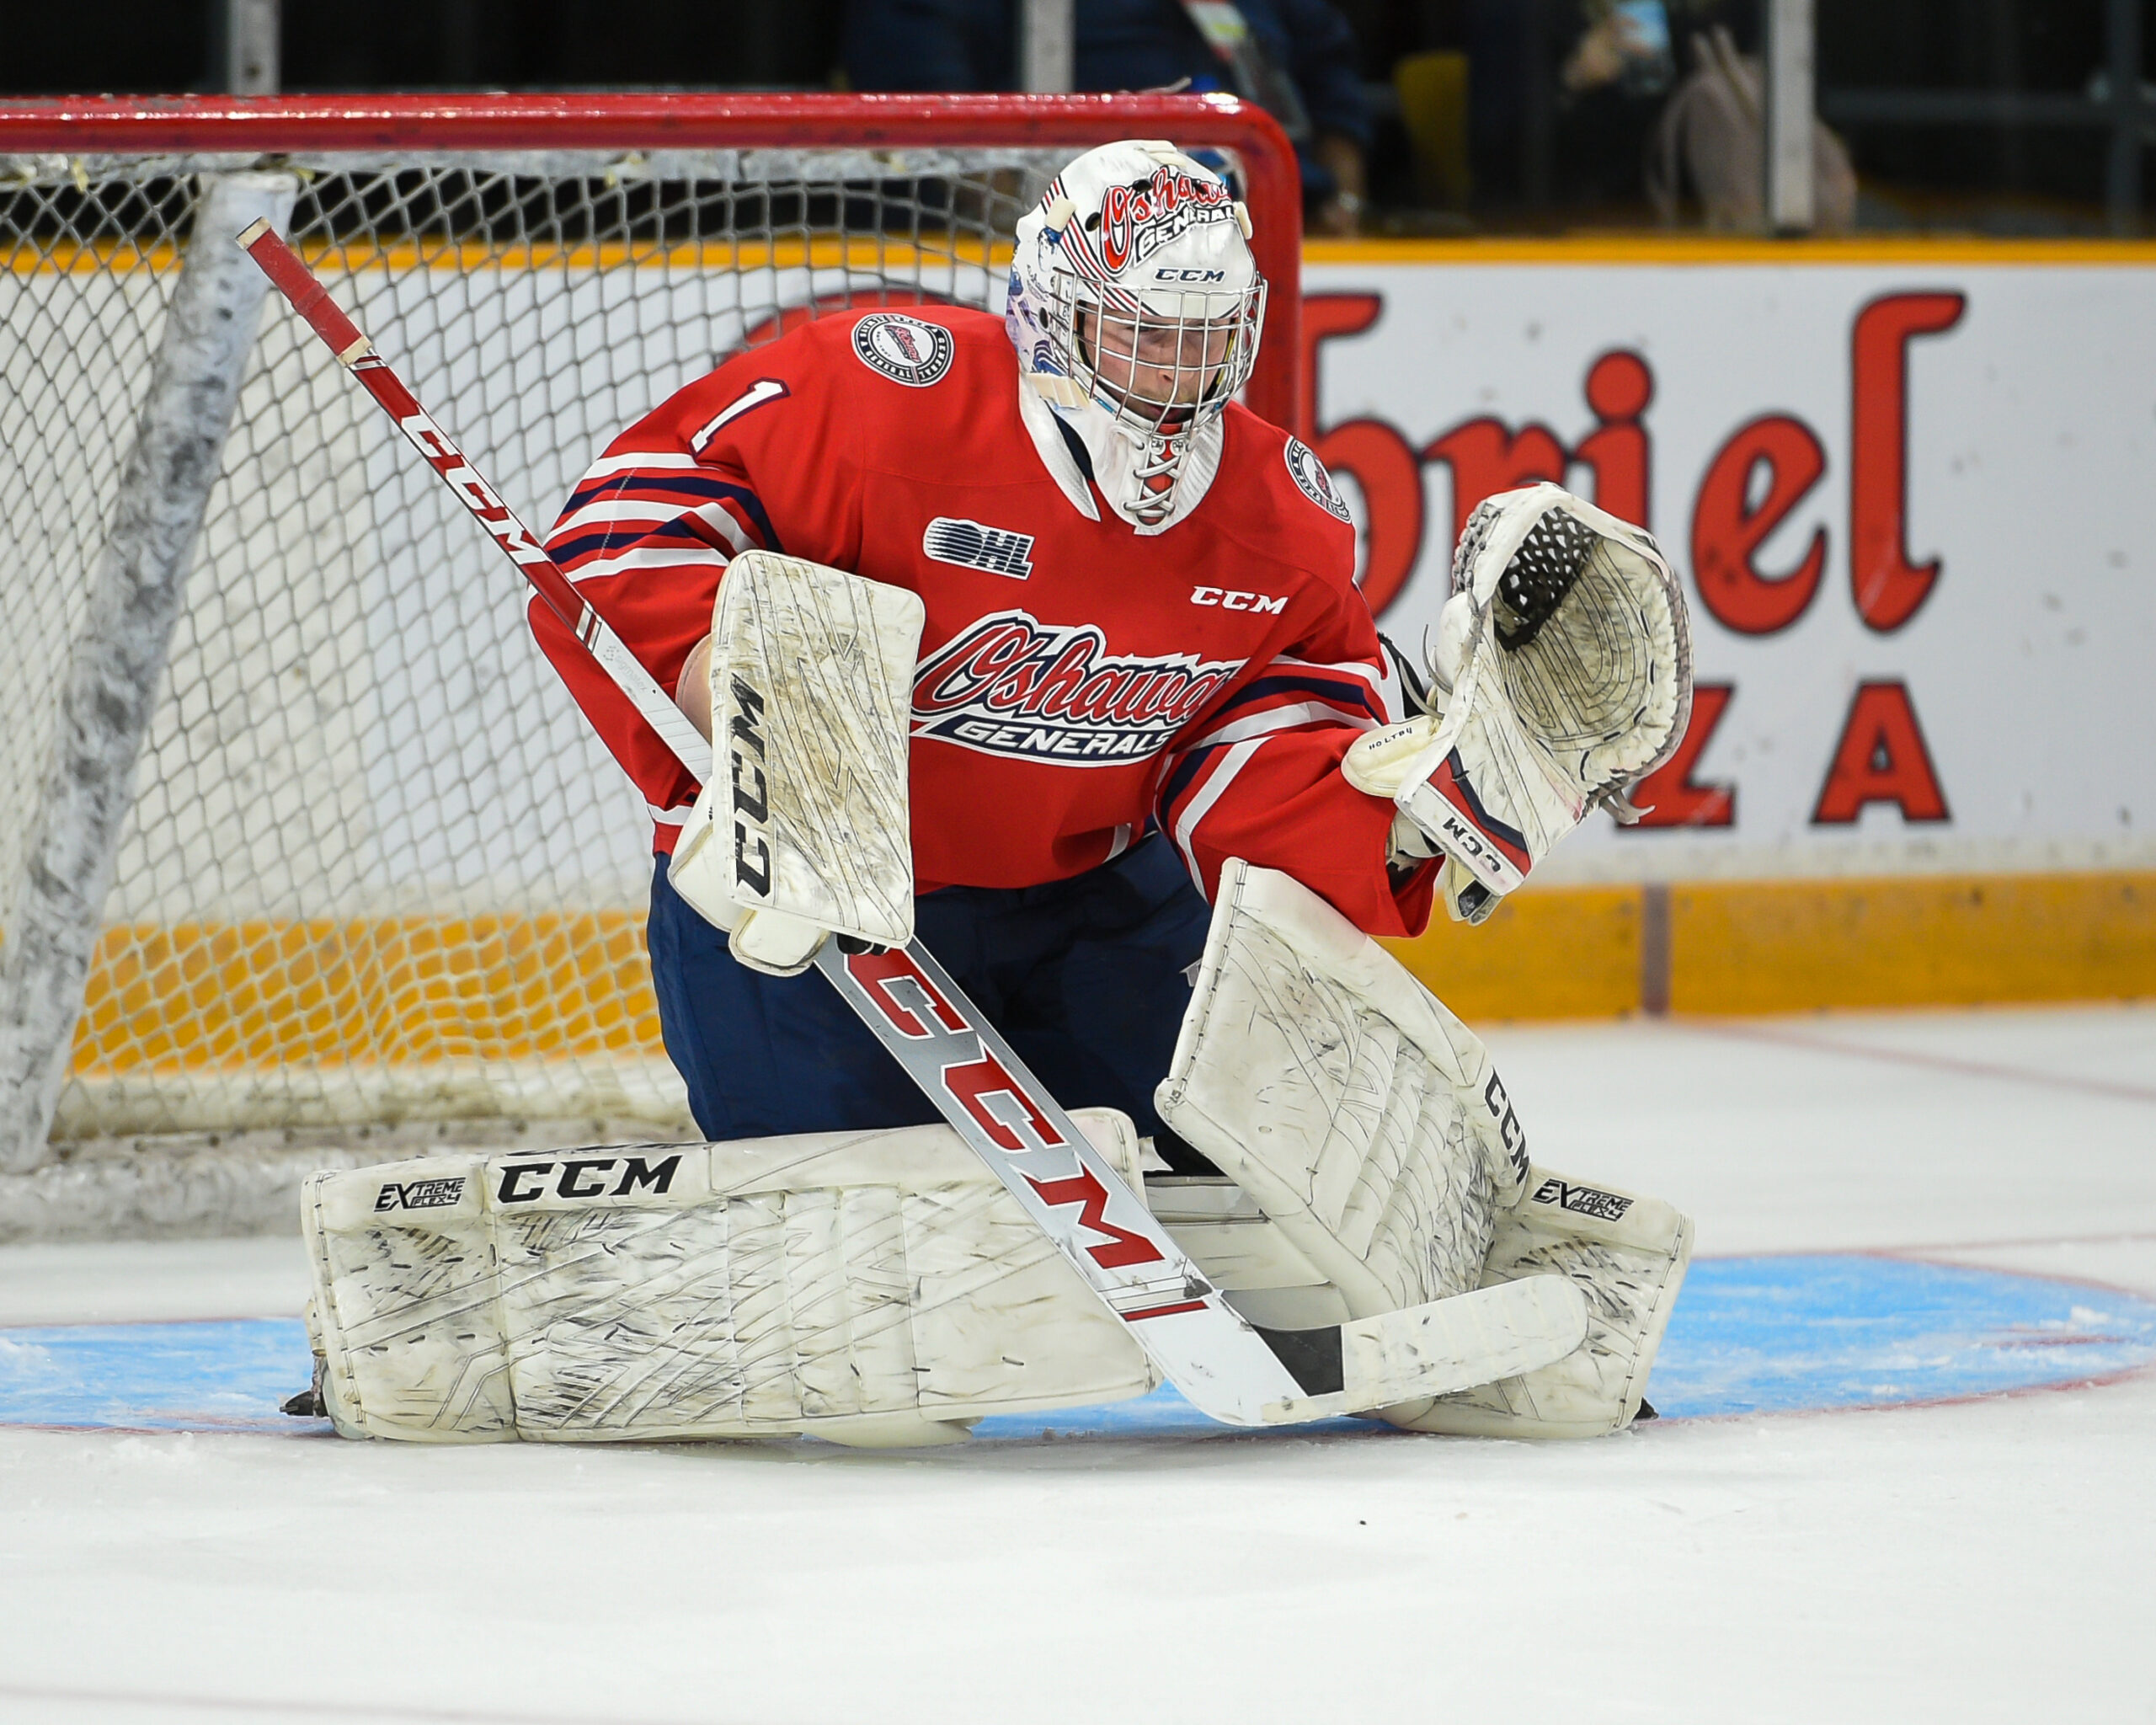 Patrick Leaver of the Oshawa Generals. Photo by Robert Lefebvre / OHL Images.